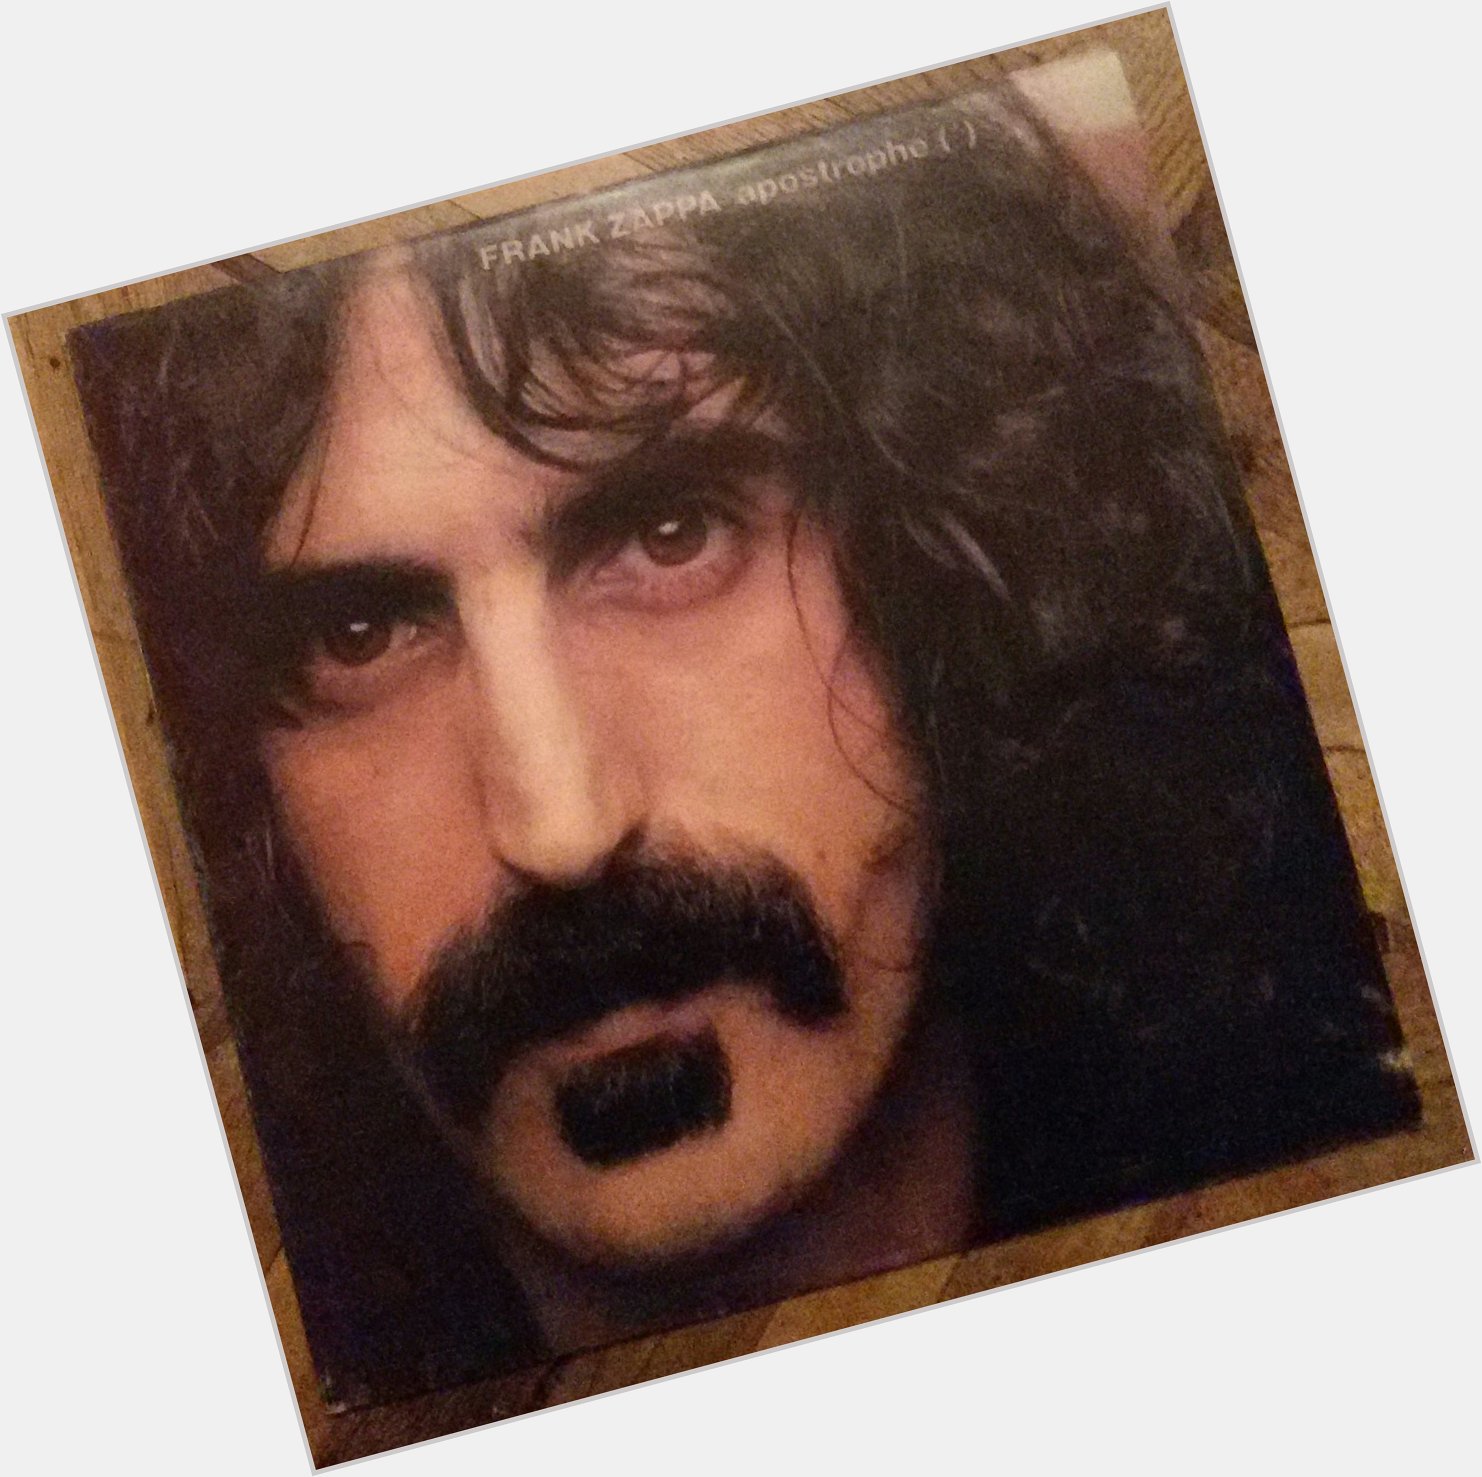  Frank Zappa

\"Without deviation from the norm, progress is not possible\"

Happy Birthday, Frank 